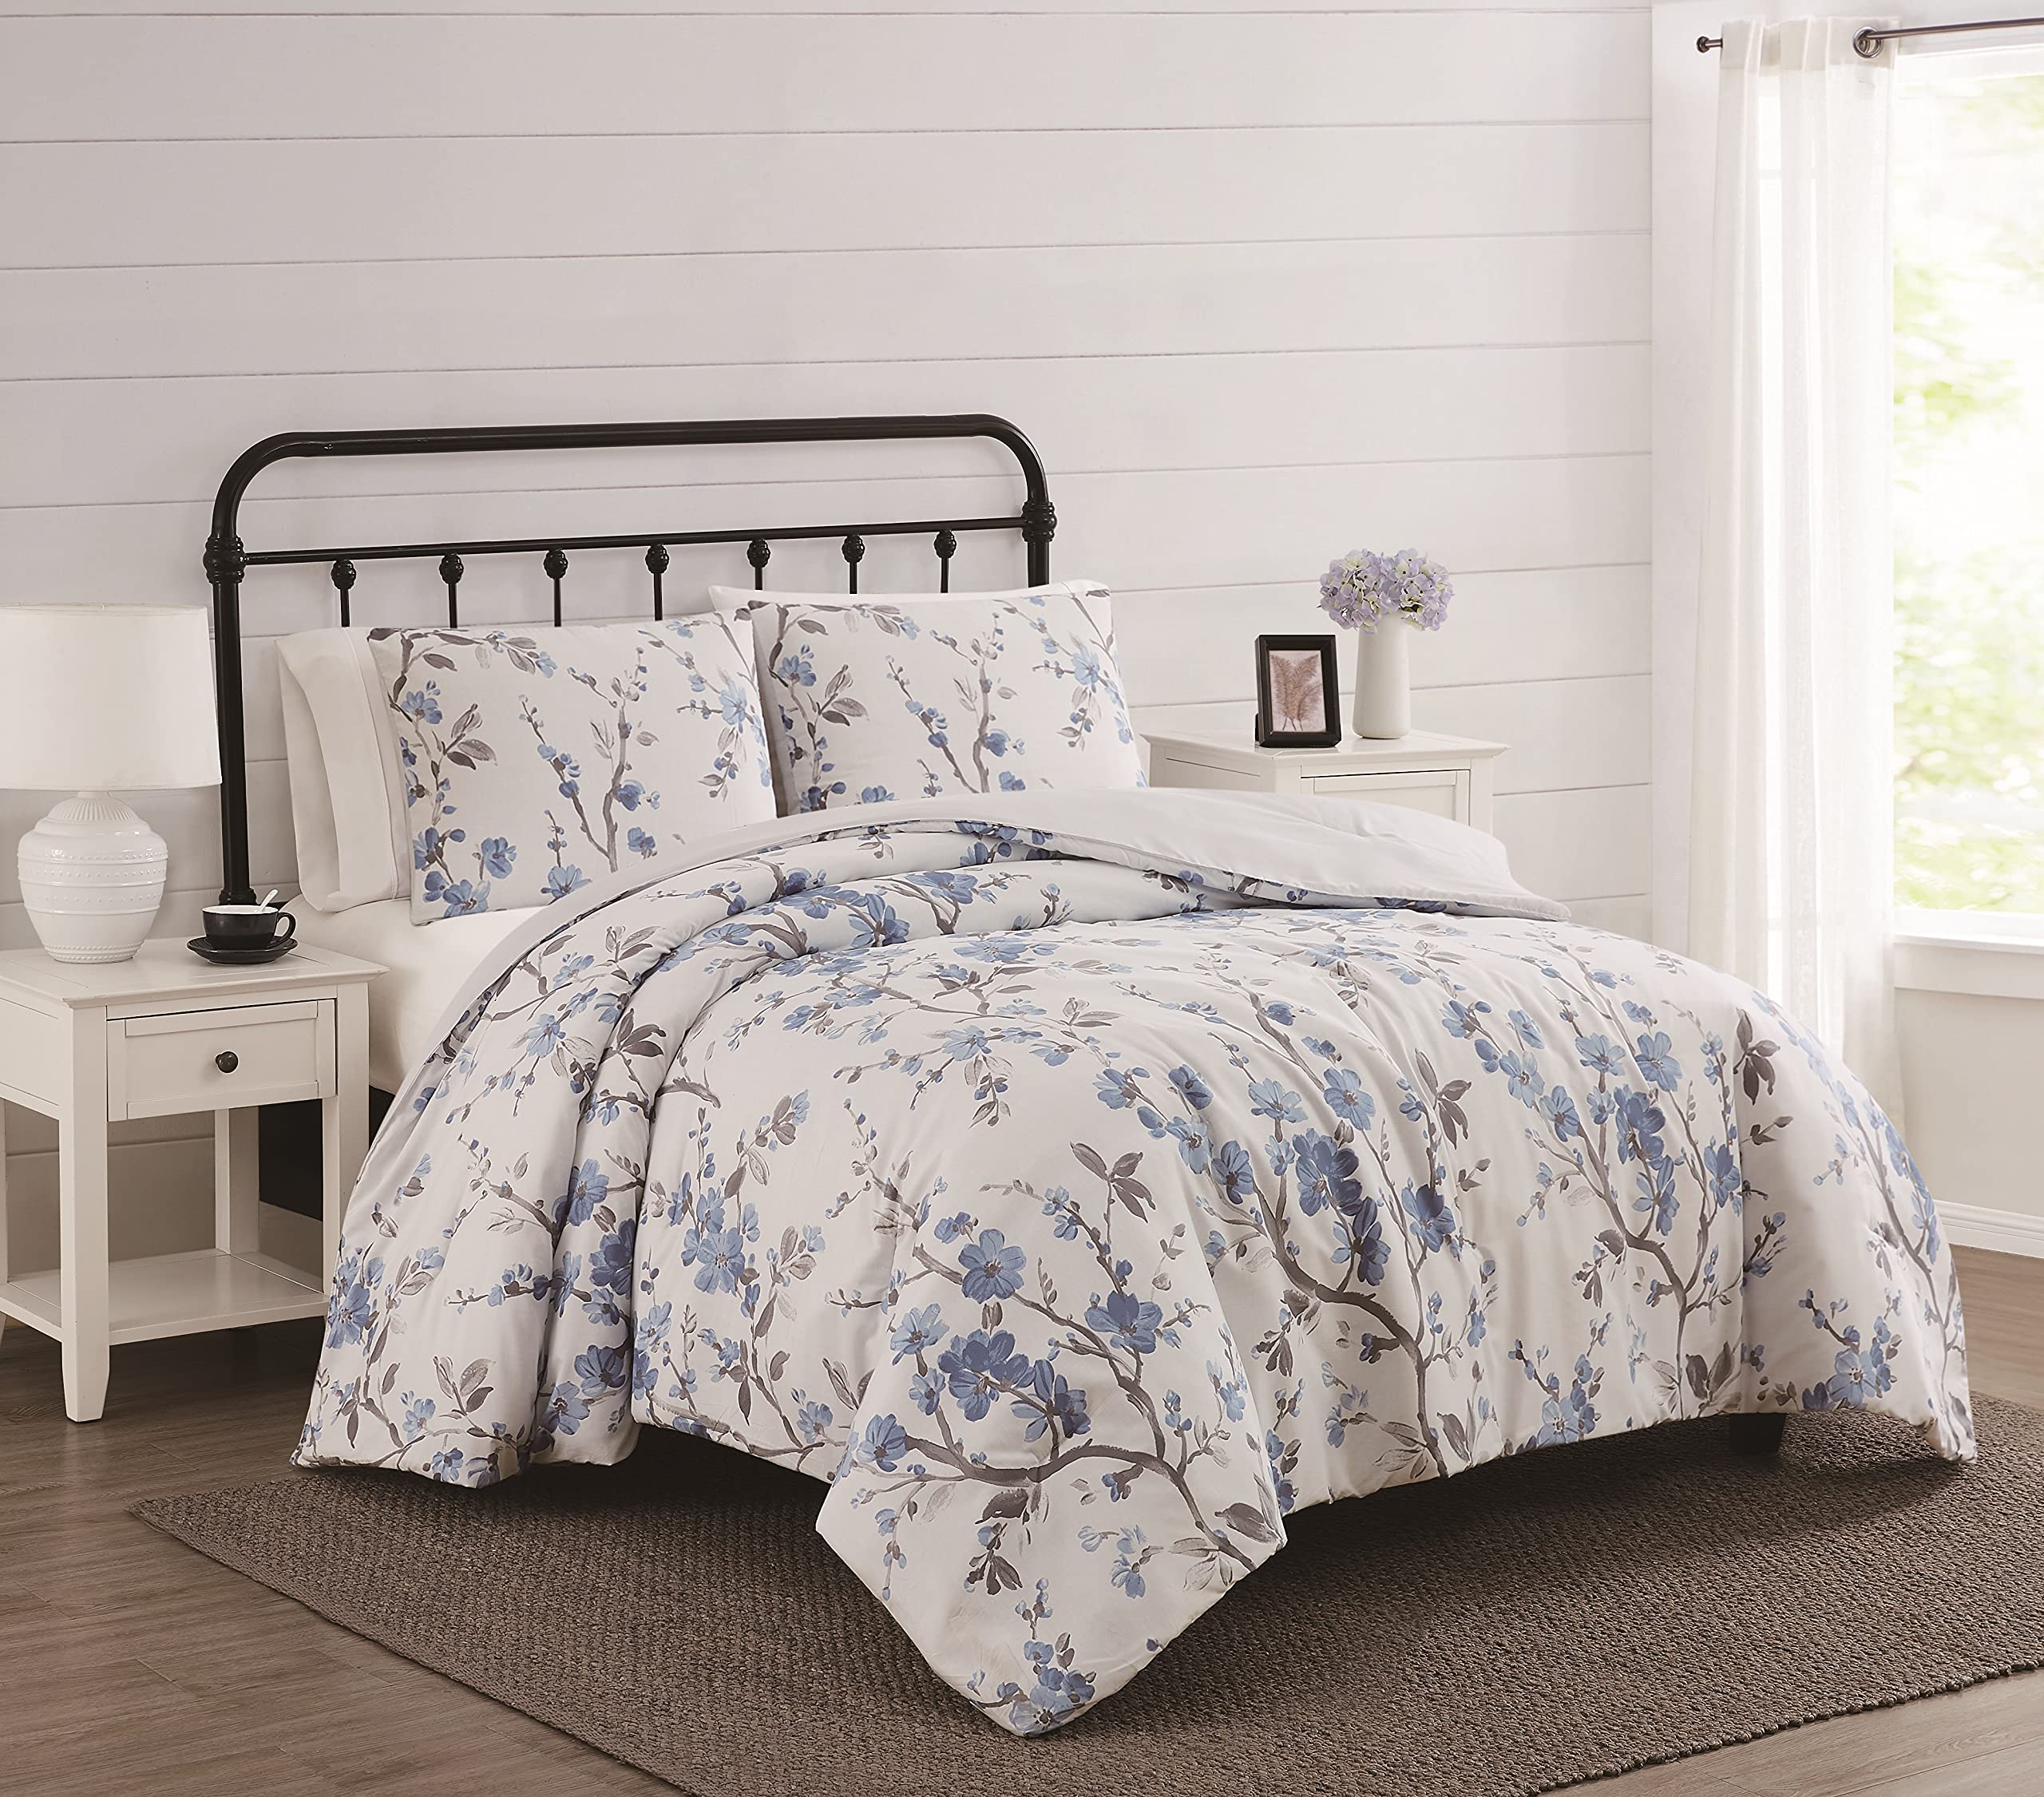 CANNON - King 3 Piece Comfort and Sham Set - Kasumi CollectionBlue